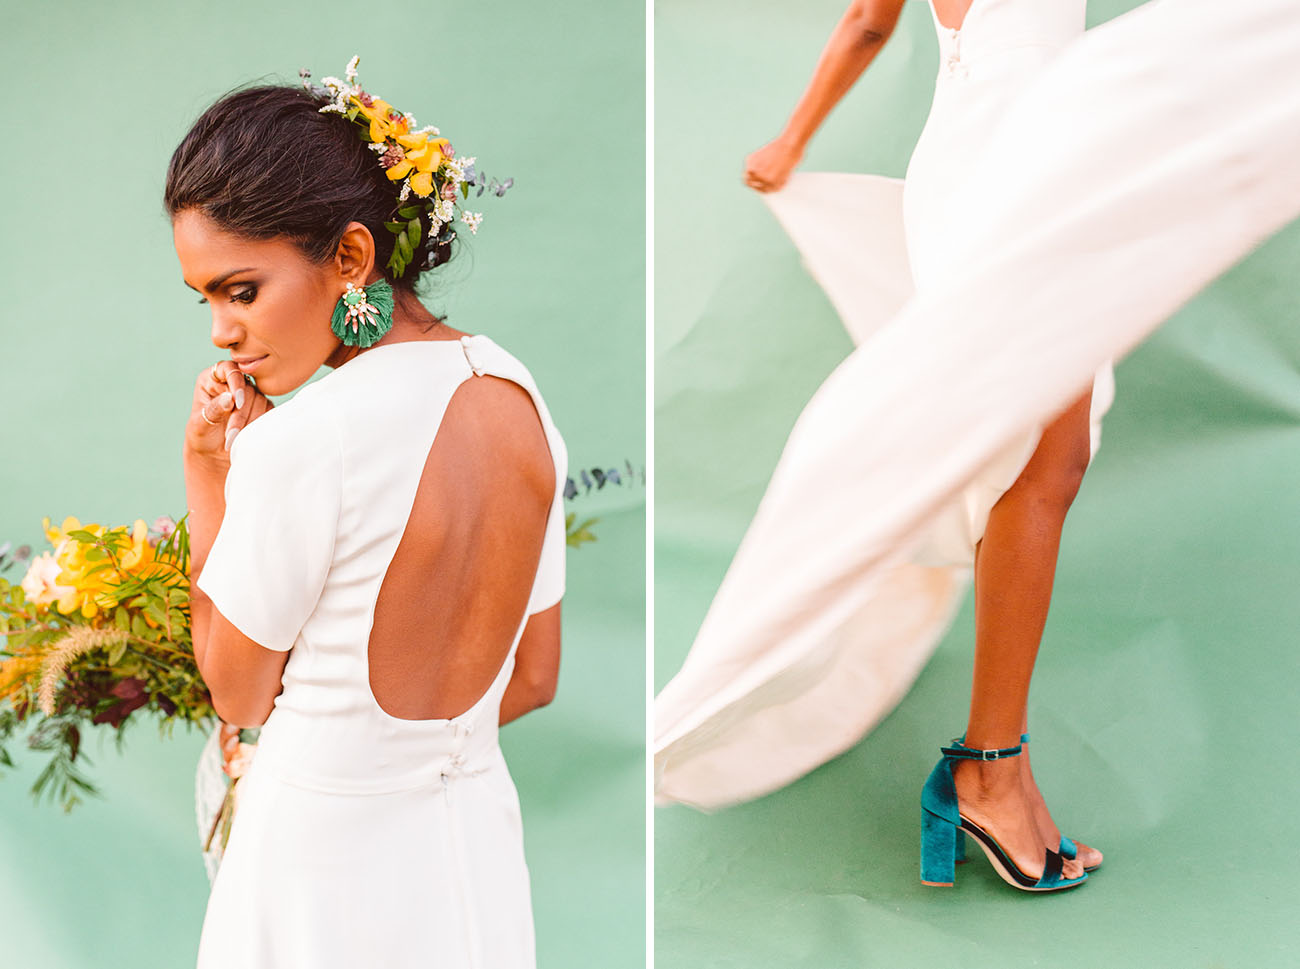 The back of the dress was cutout and the bride was rocking emerald velvet ankle strap shoes